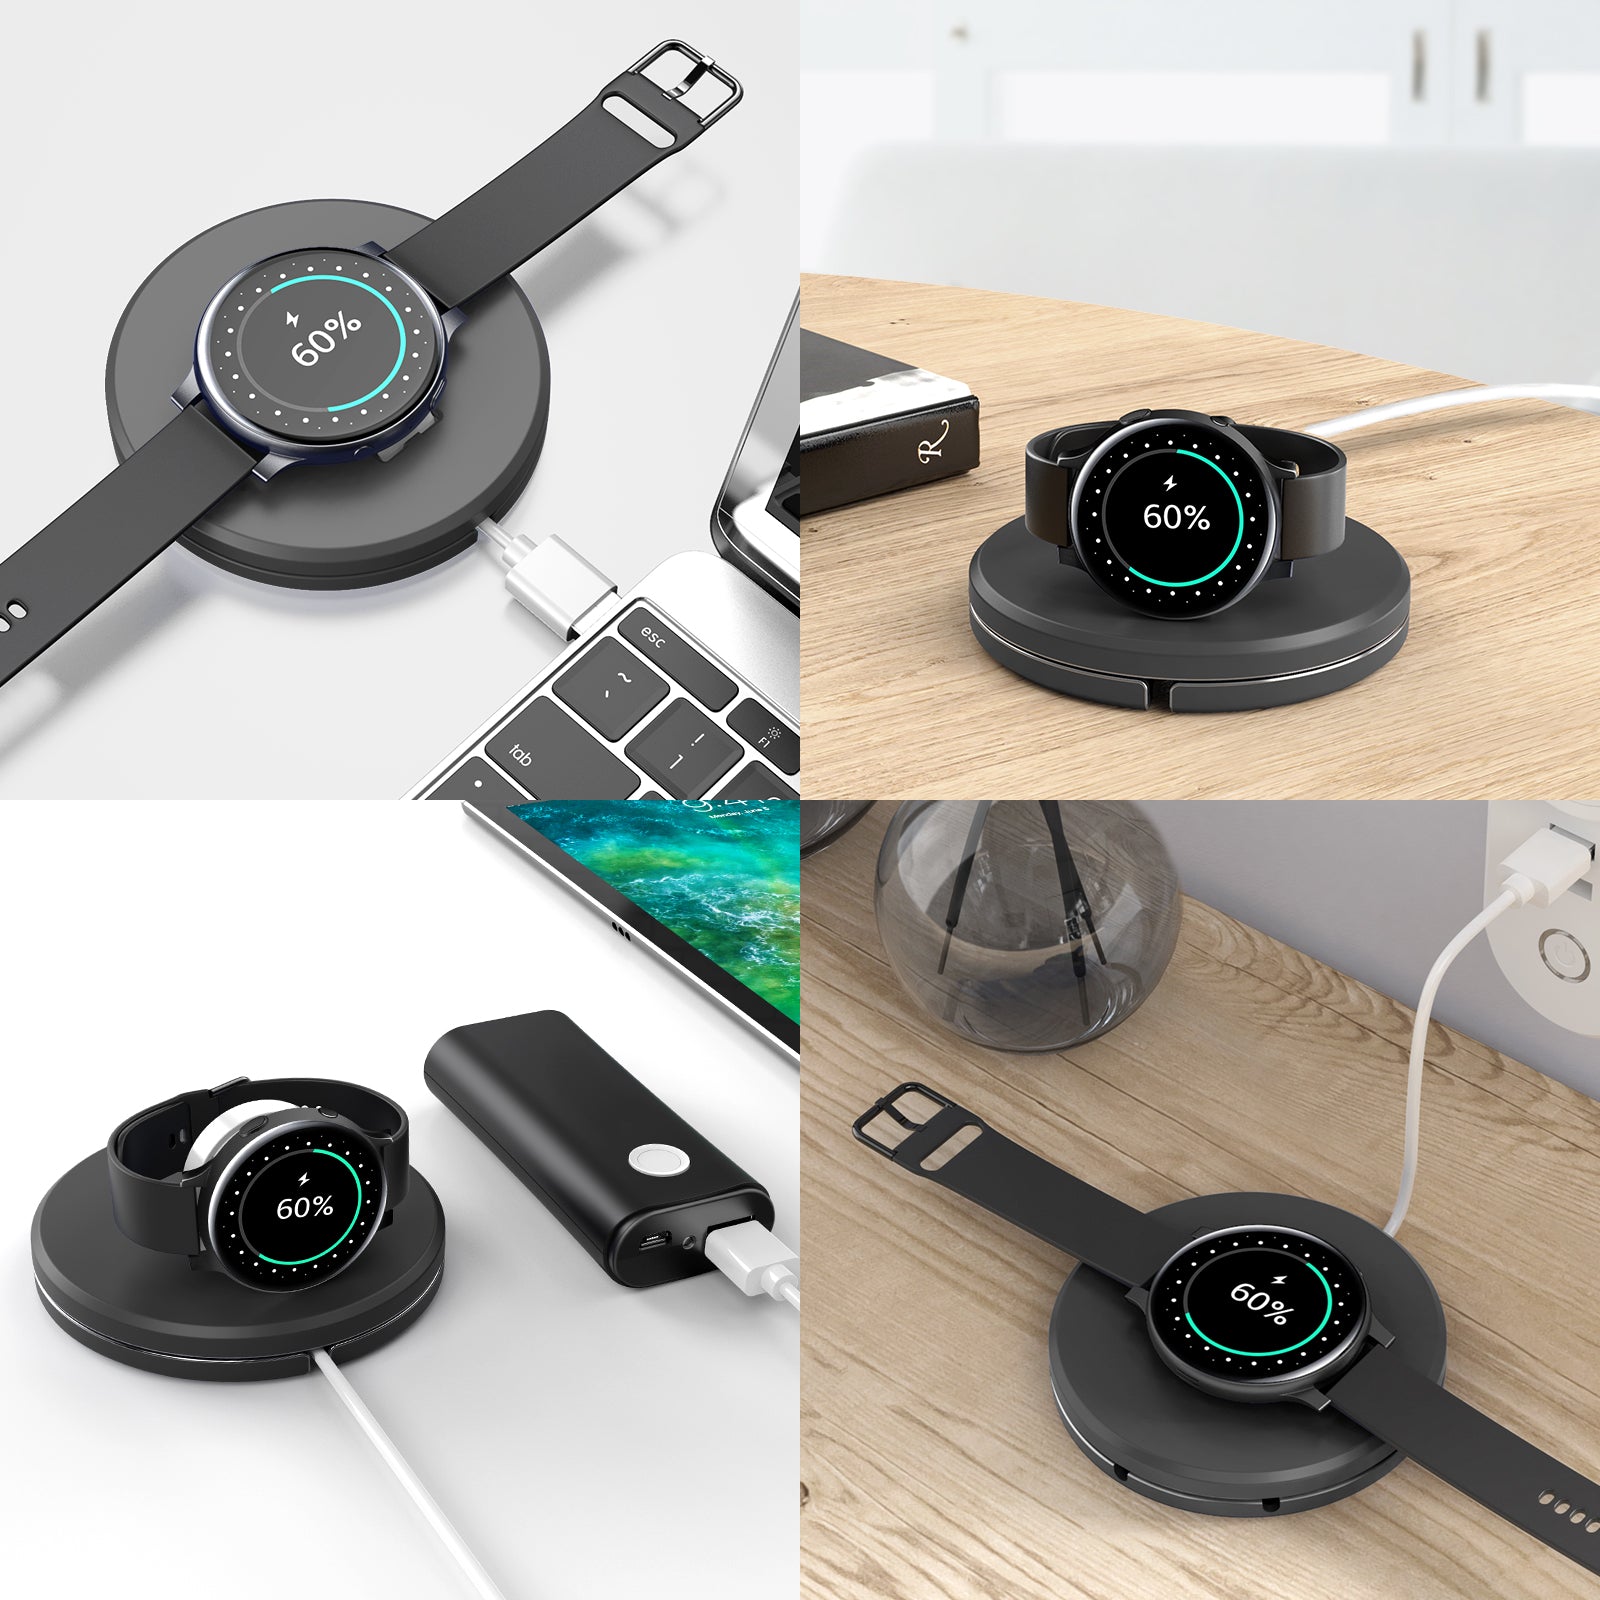 QS-03 Portable Folding Wireless Charger Cable Winder Stand Dock for Samsung Galaxy Watch Active/Active2/Watch3 - Black